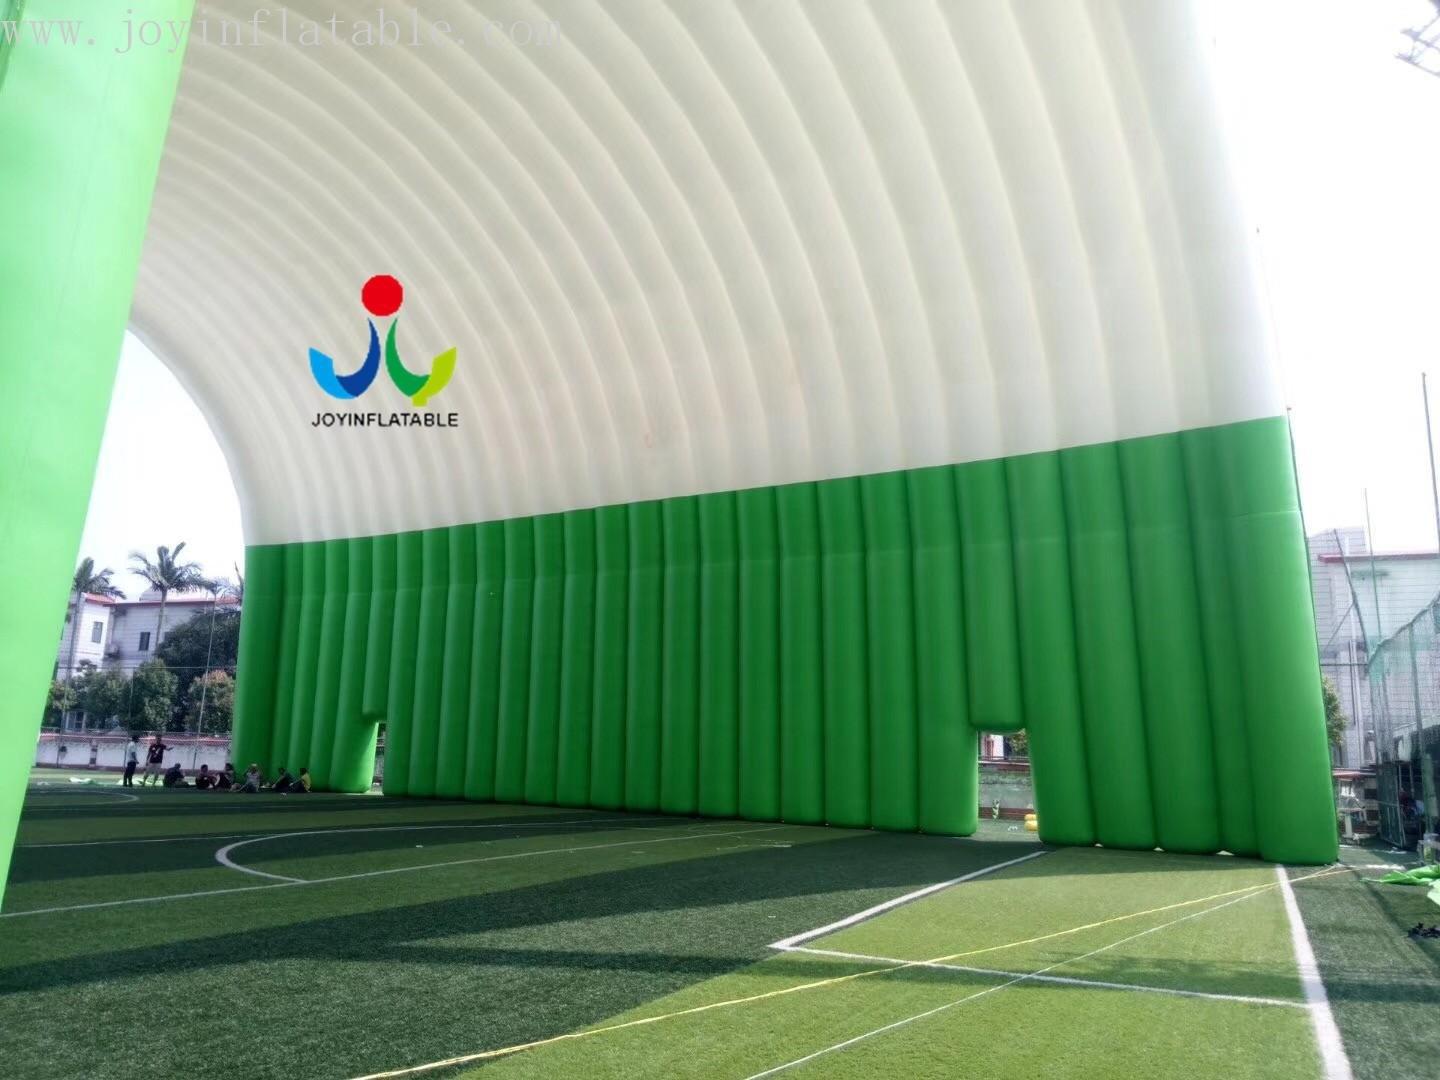 JOY inflatable giant inflatable advertising directly sale for kids